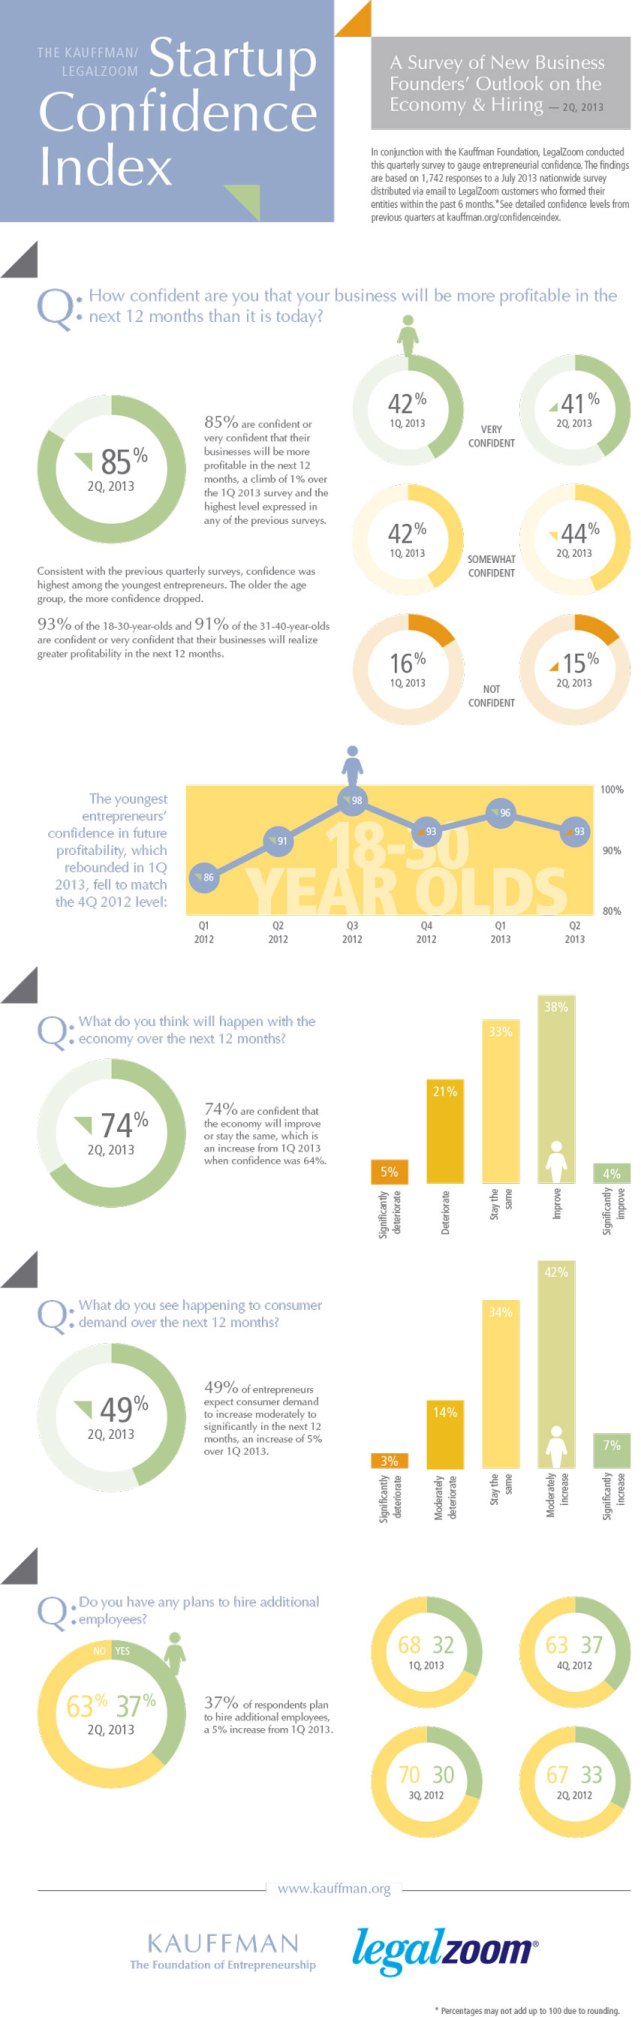 2013 Q2 Kauffman LegalZoom Startup Confidence Infographic